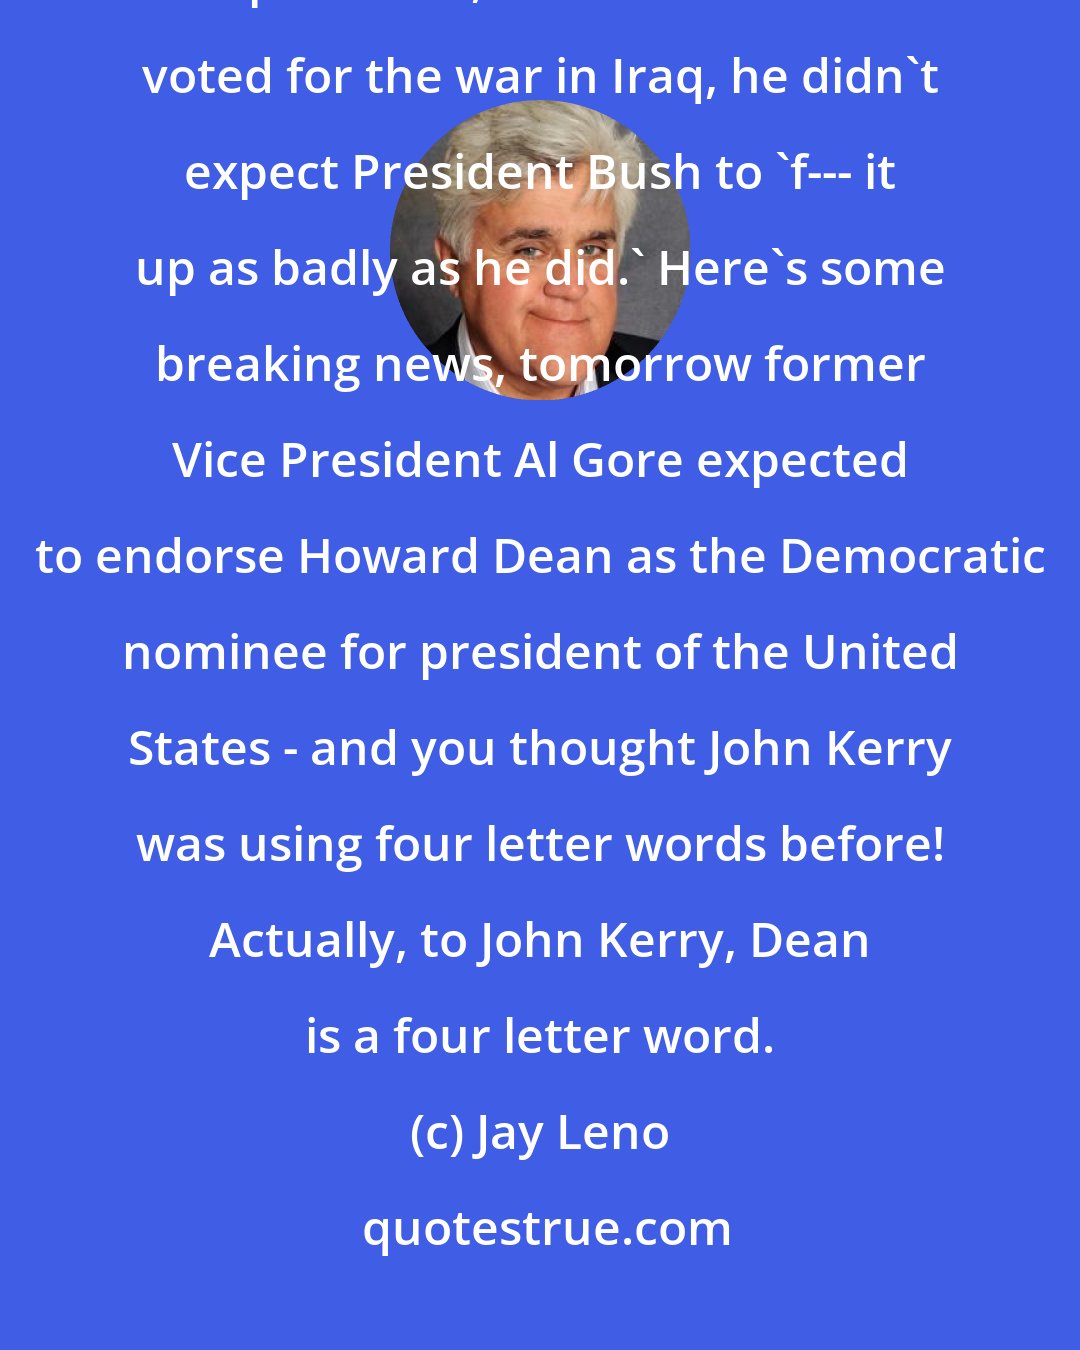 Jay Leno: In an interview with Rolling Stone, Senator John Kerry, who is running for president, said that when he voted for the war in Iraq, he didn't expect President Bush to 'f--- it up as badly as he did.' Here's some breaking news, tomorrow former Vice President Al Gore expected to endorse Howard Dean as the Democratic nominee for president of the United States - and you thought John Kerry was using four letter words before! Actually, to John Kerry, Dean is a four letter word.